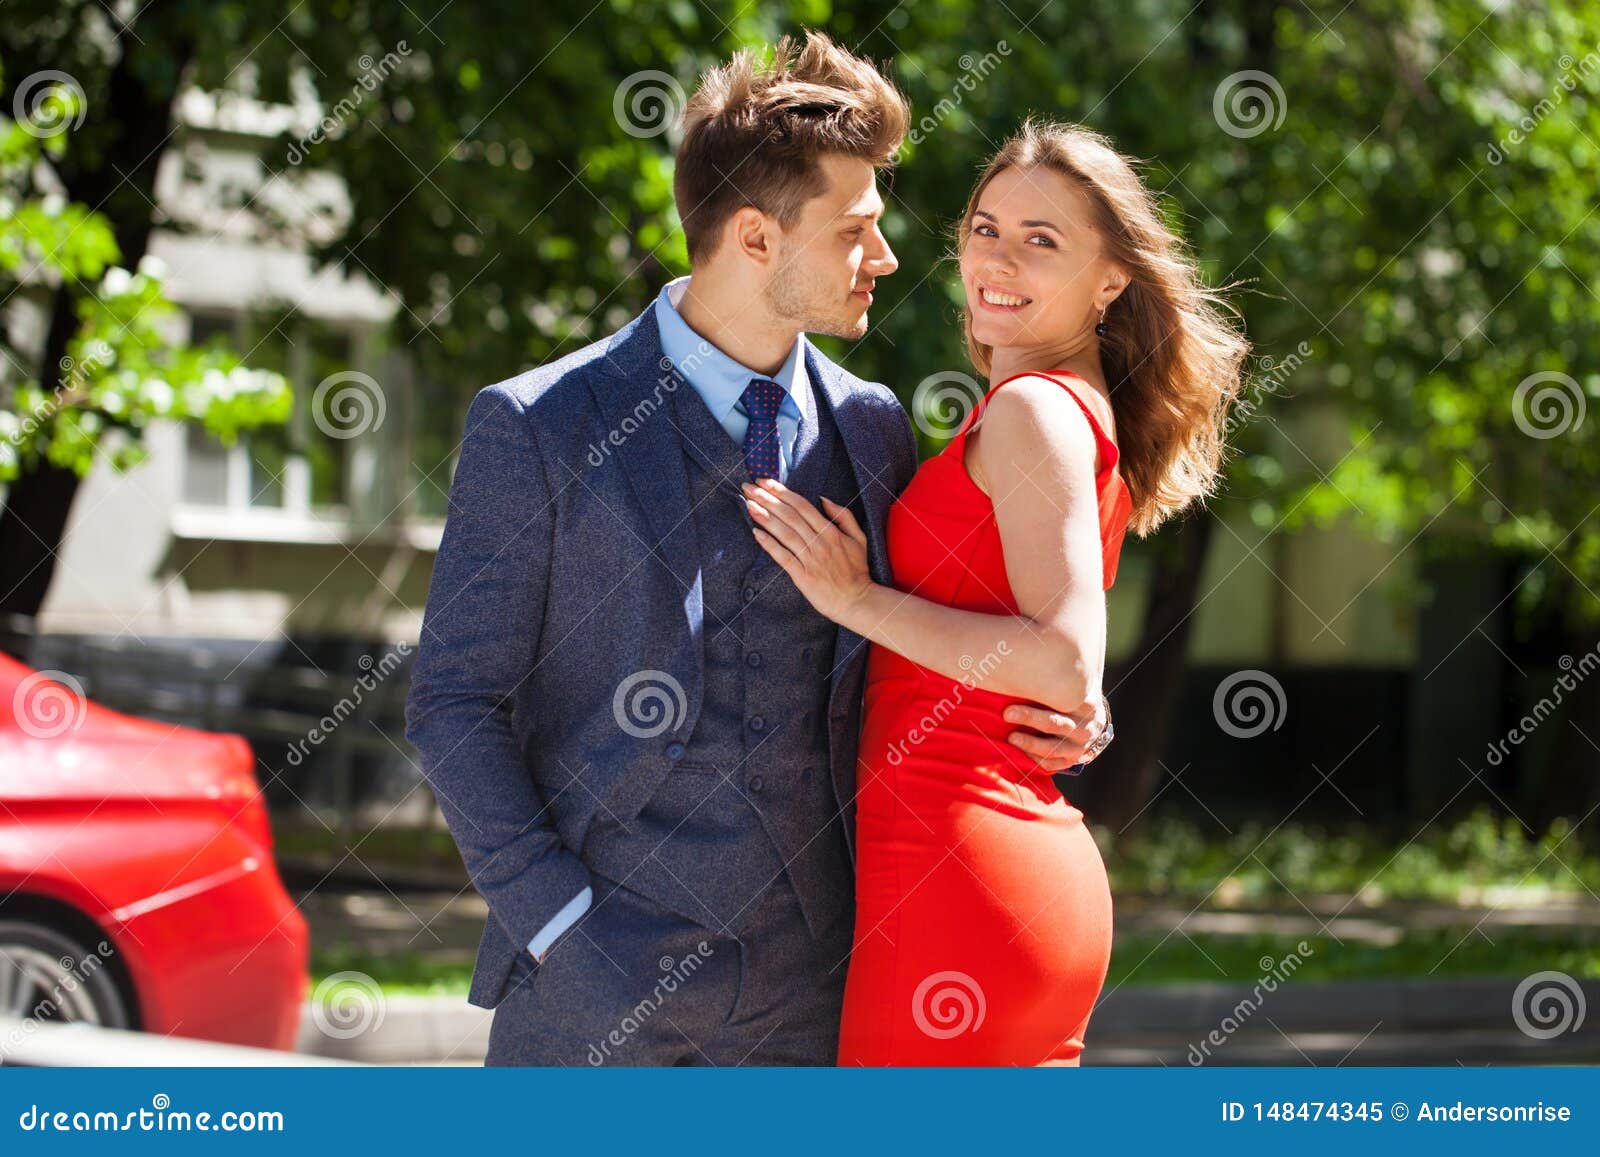 https://thumbs.dreamstime.com/z/young-couple-european-women-men-city-street-lifestyle-togetherness-concept-romance-love-young-couple-european-148474345.jpg